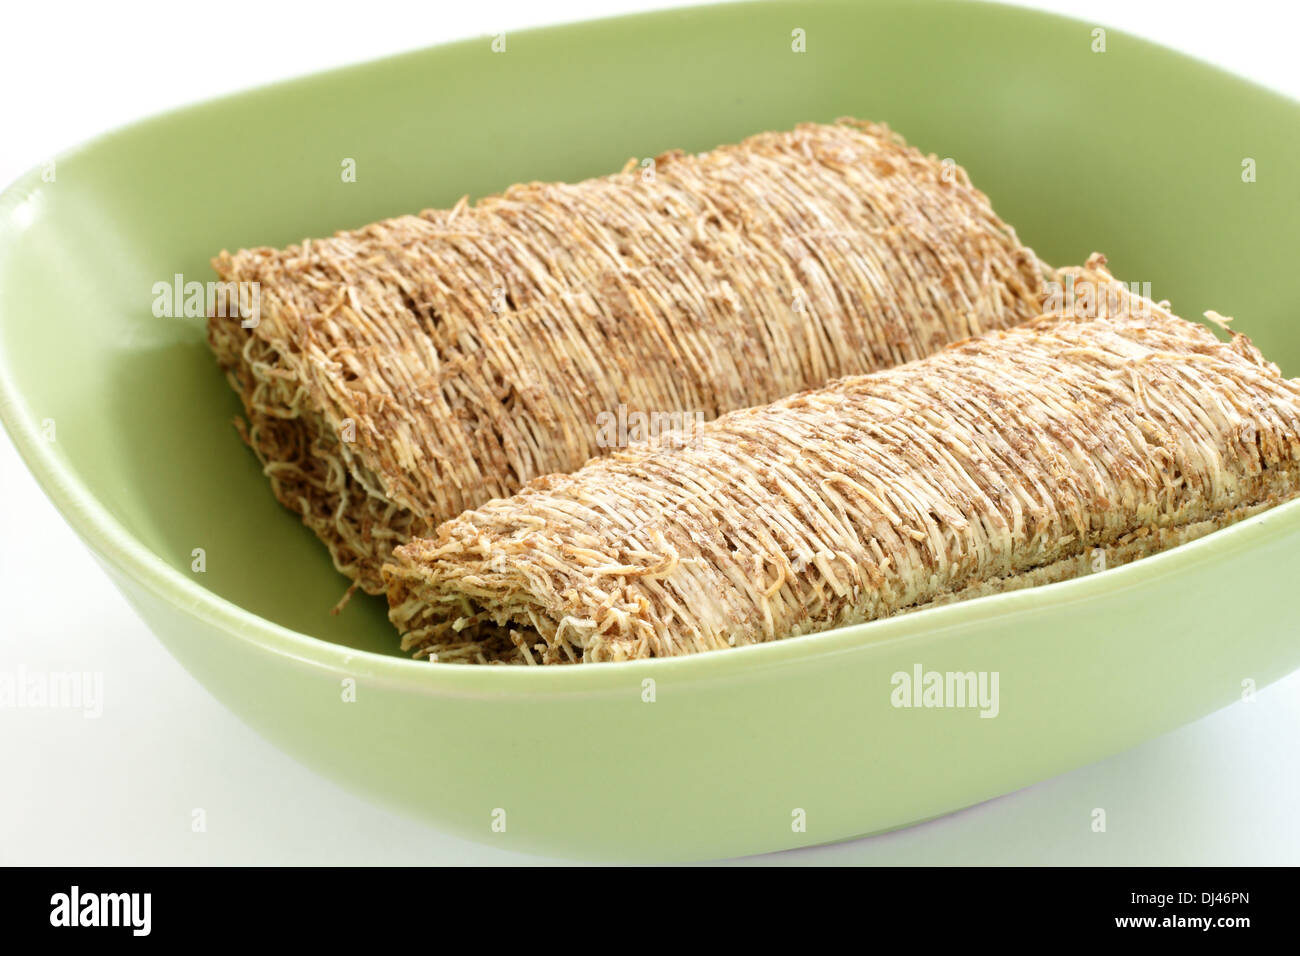 Shredded wheat biscuits in a breakfast bowl Stock Photo